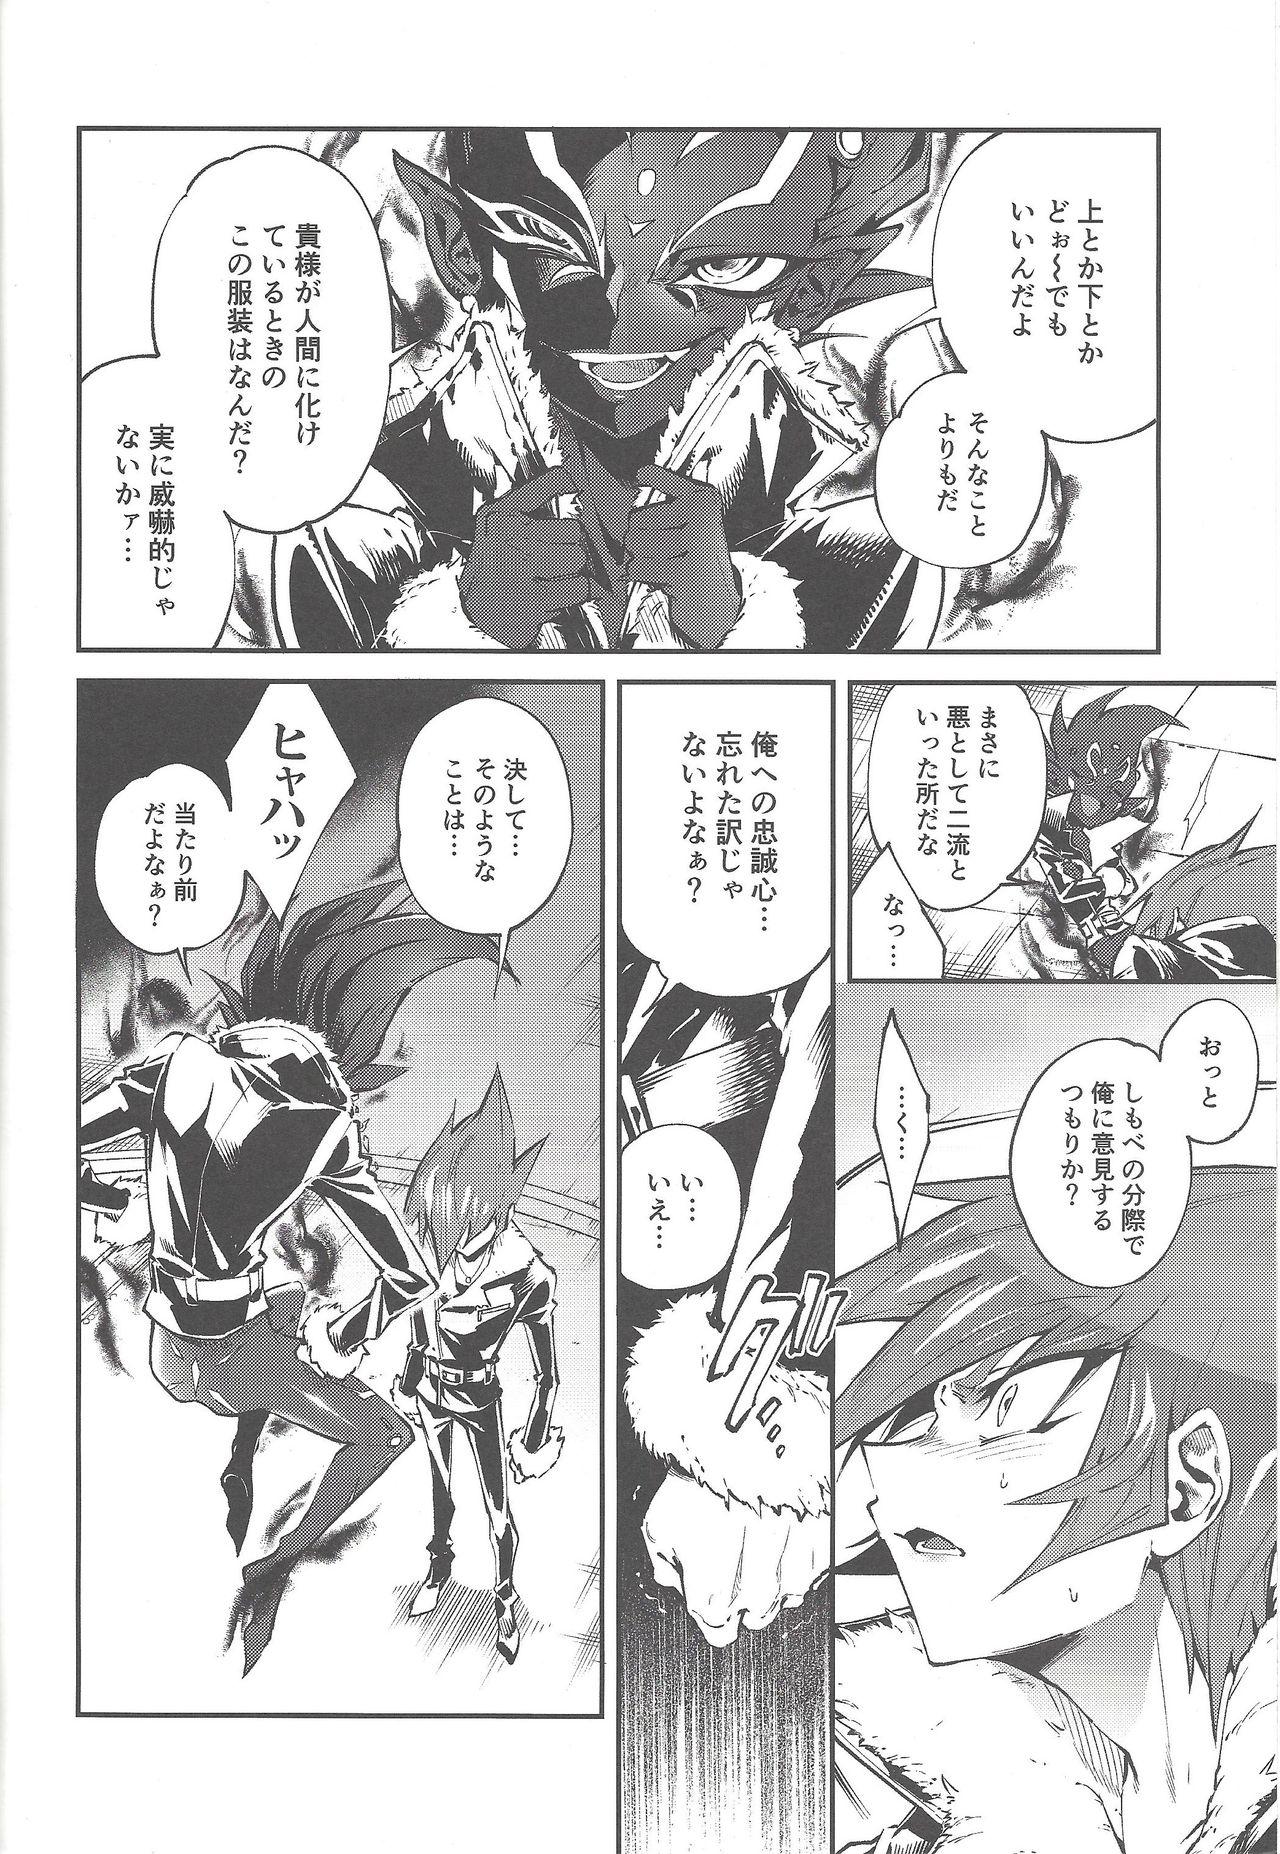 Sex Party Be no bebe - Yu-gi-oh zexal Neighbor - Page 5